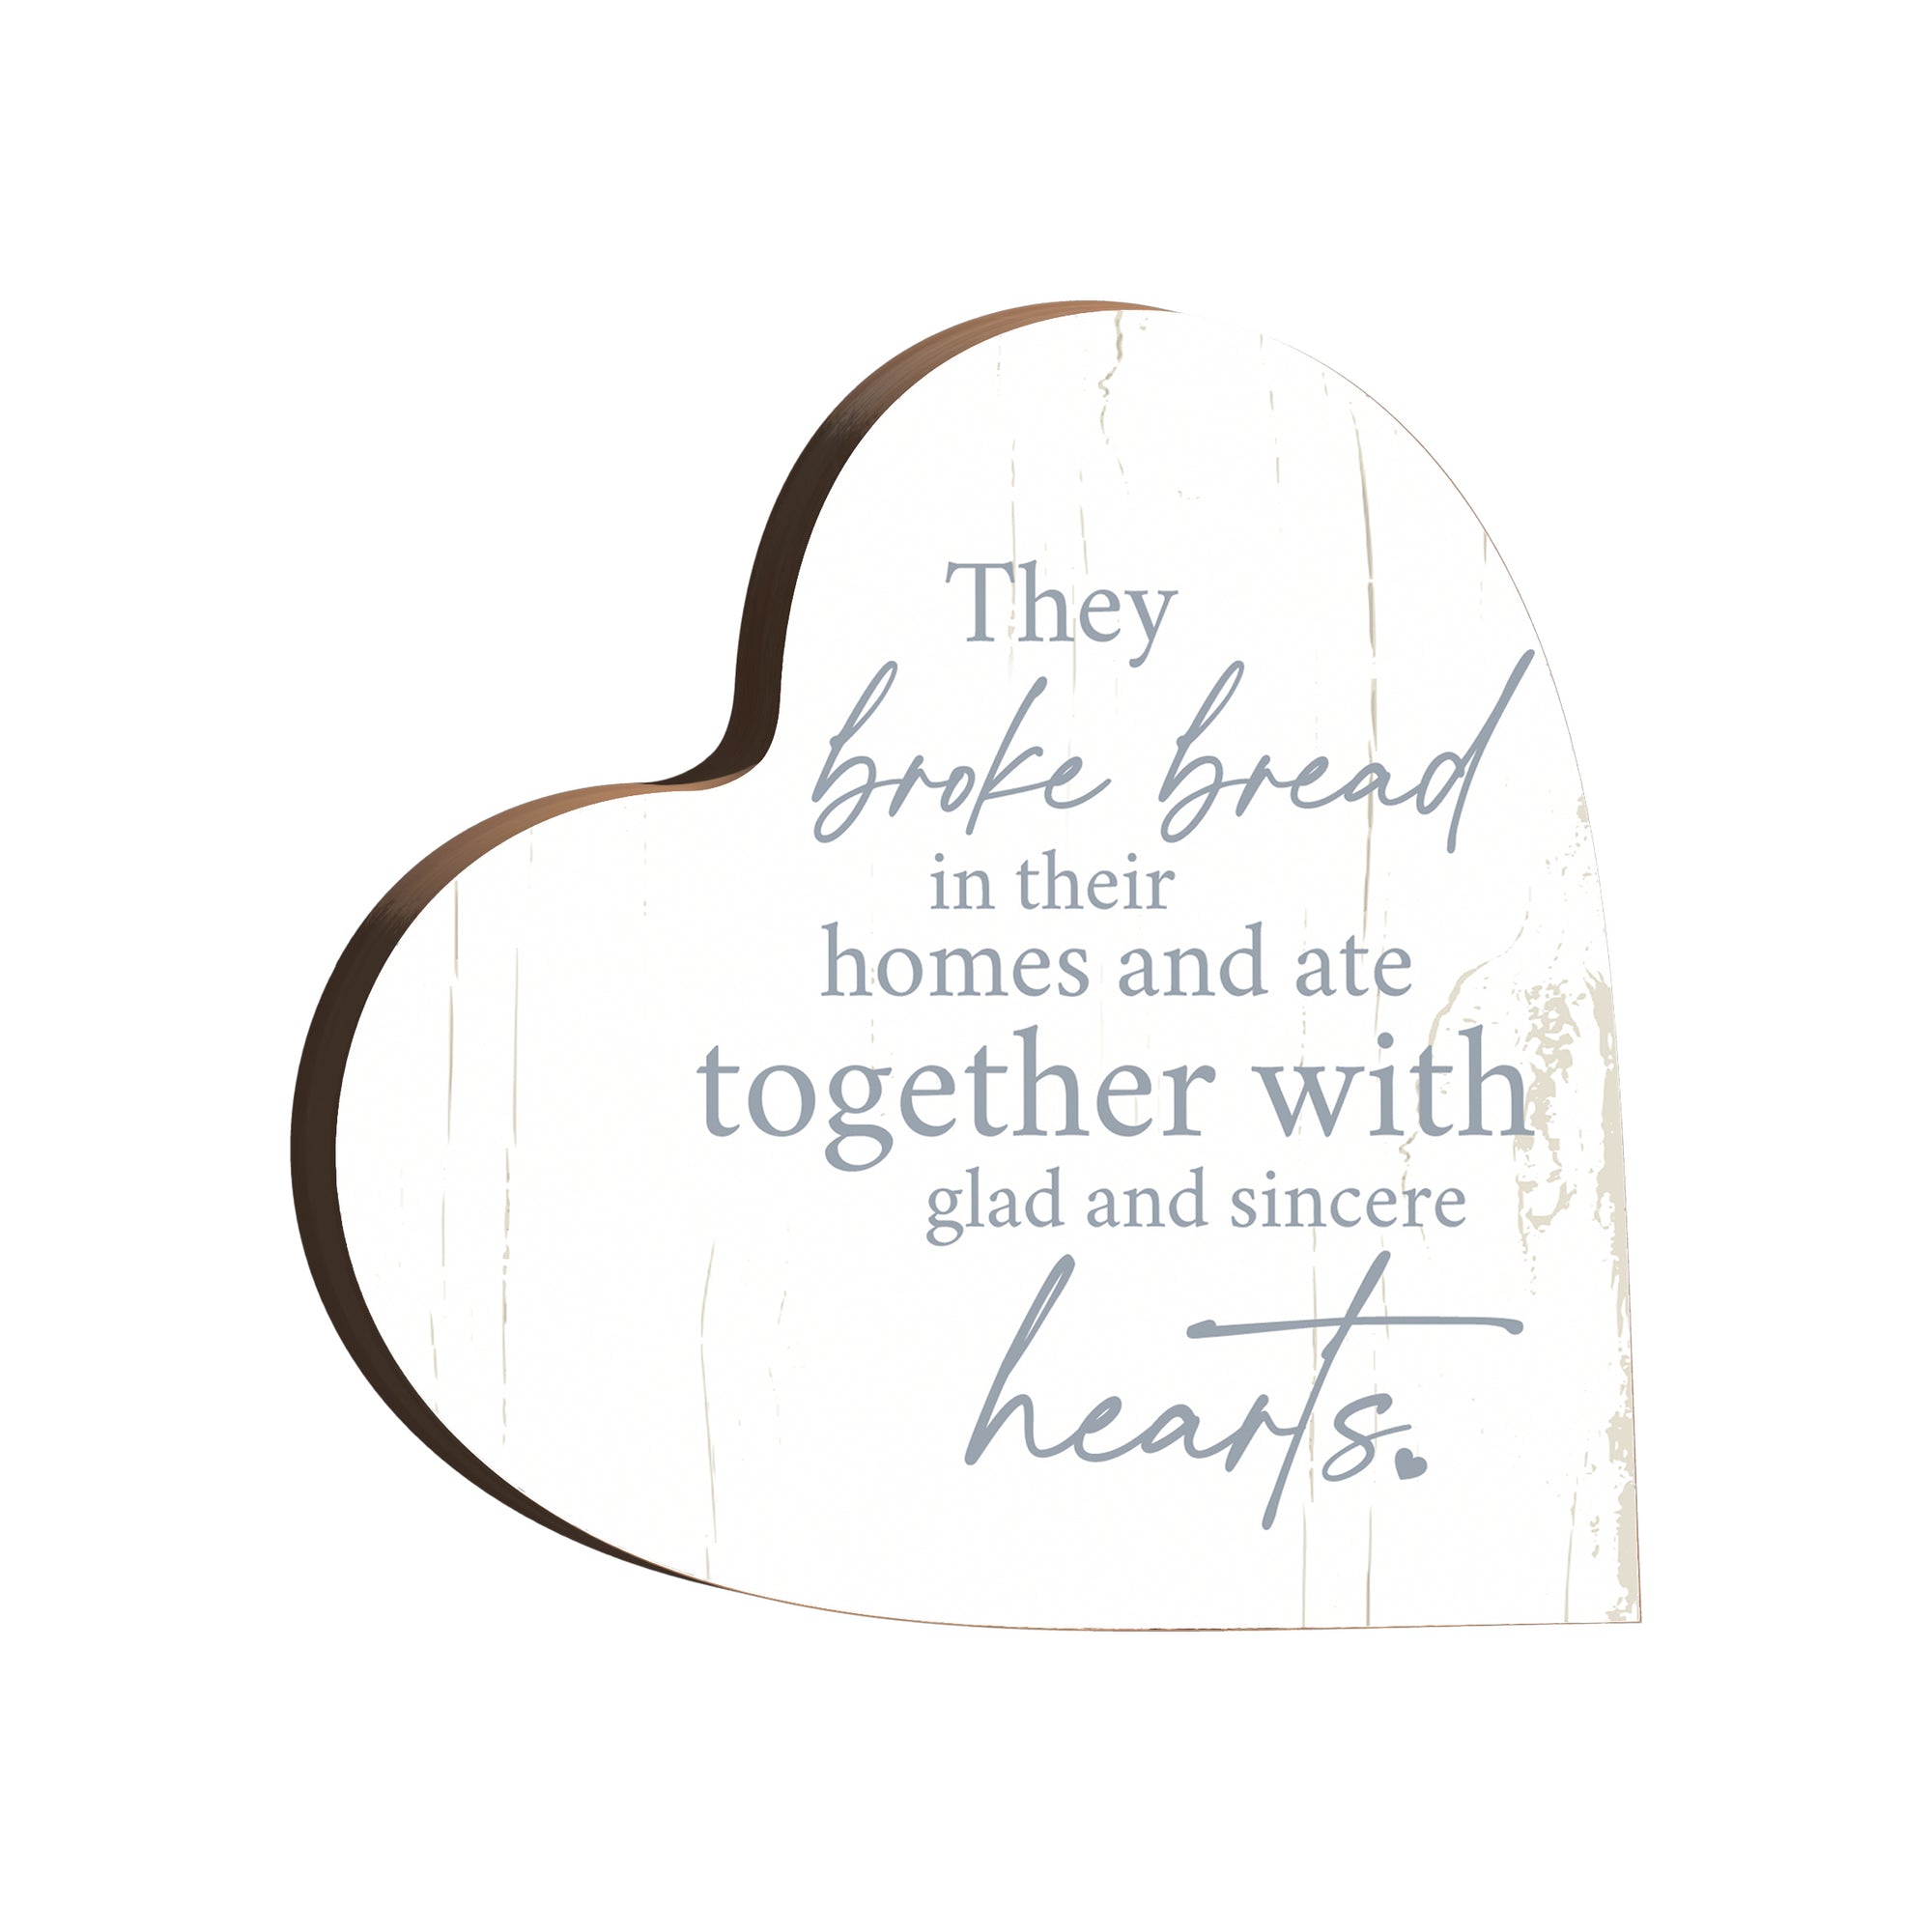 Wooden heart block décor gift - Adding warmth to your home decorations.